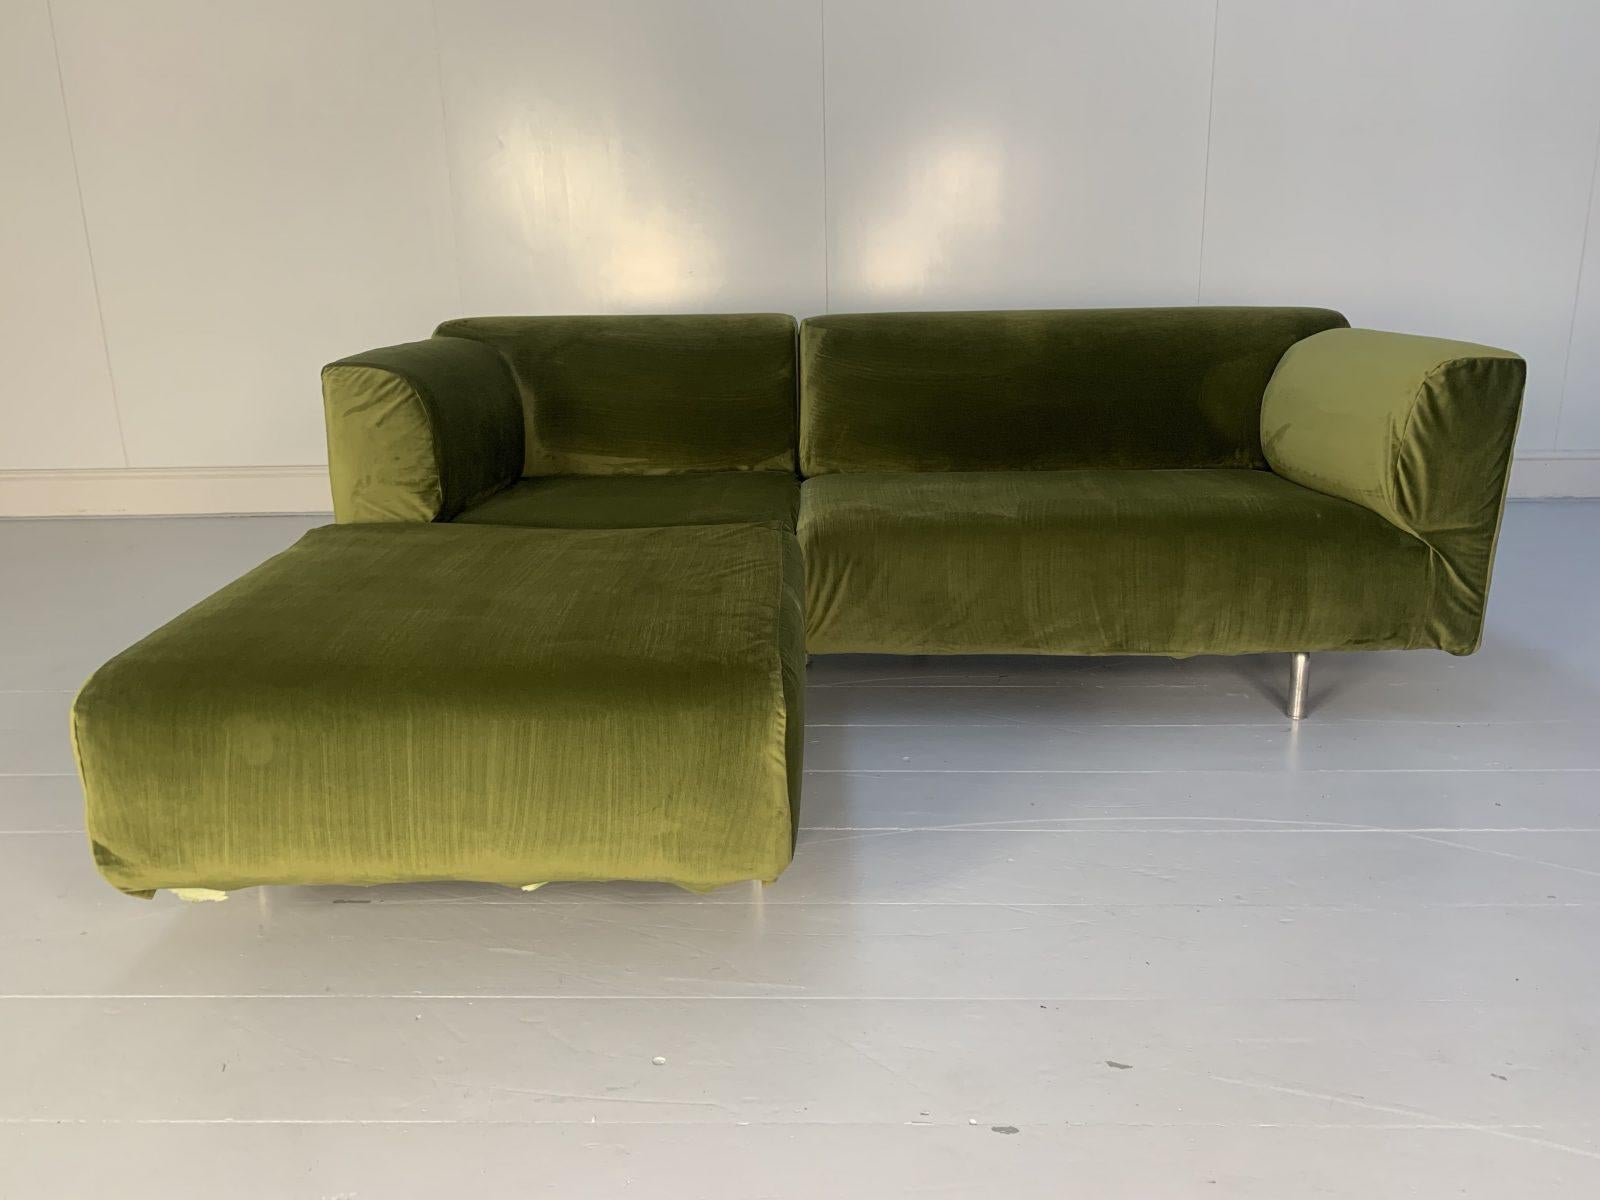 This is superb, immaculately-presented “250 Met” 3-Seat sectional, compact L-Shape Sofa, from the world renown Italian furniture house of Cassina.

In a world of temporary pleasures, Cassina create beautiful furniture that remains a joy